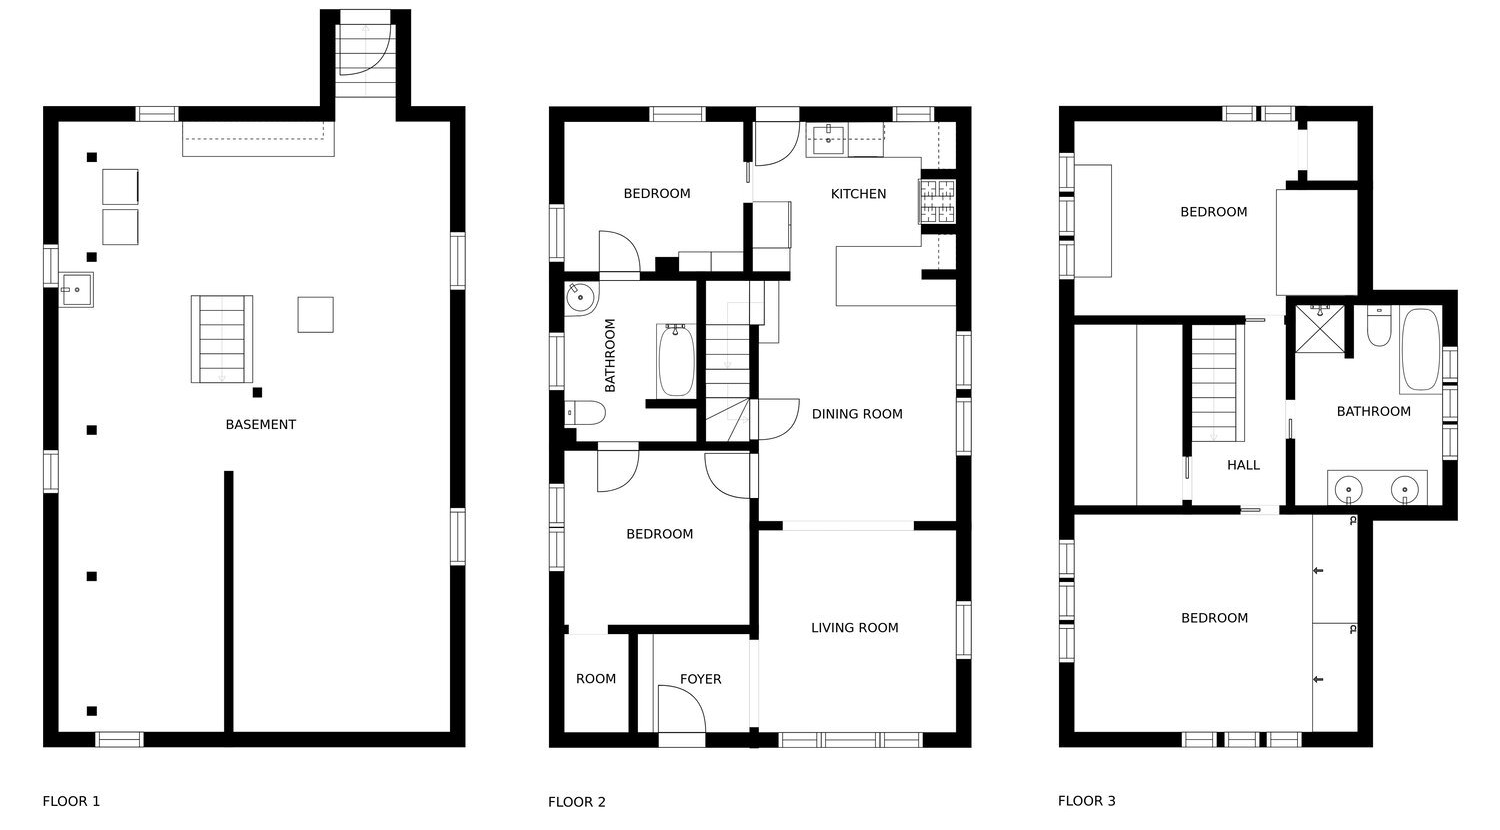 Photo of floorplan for a three story home.